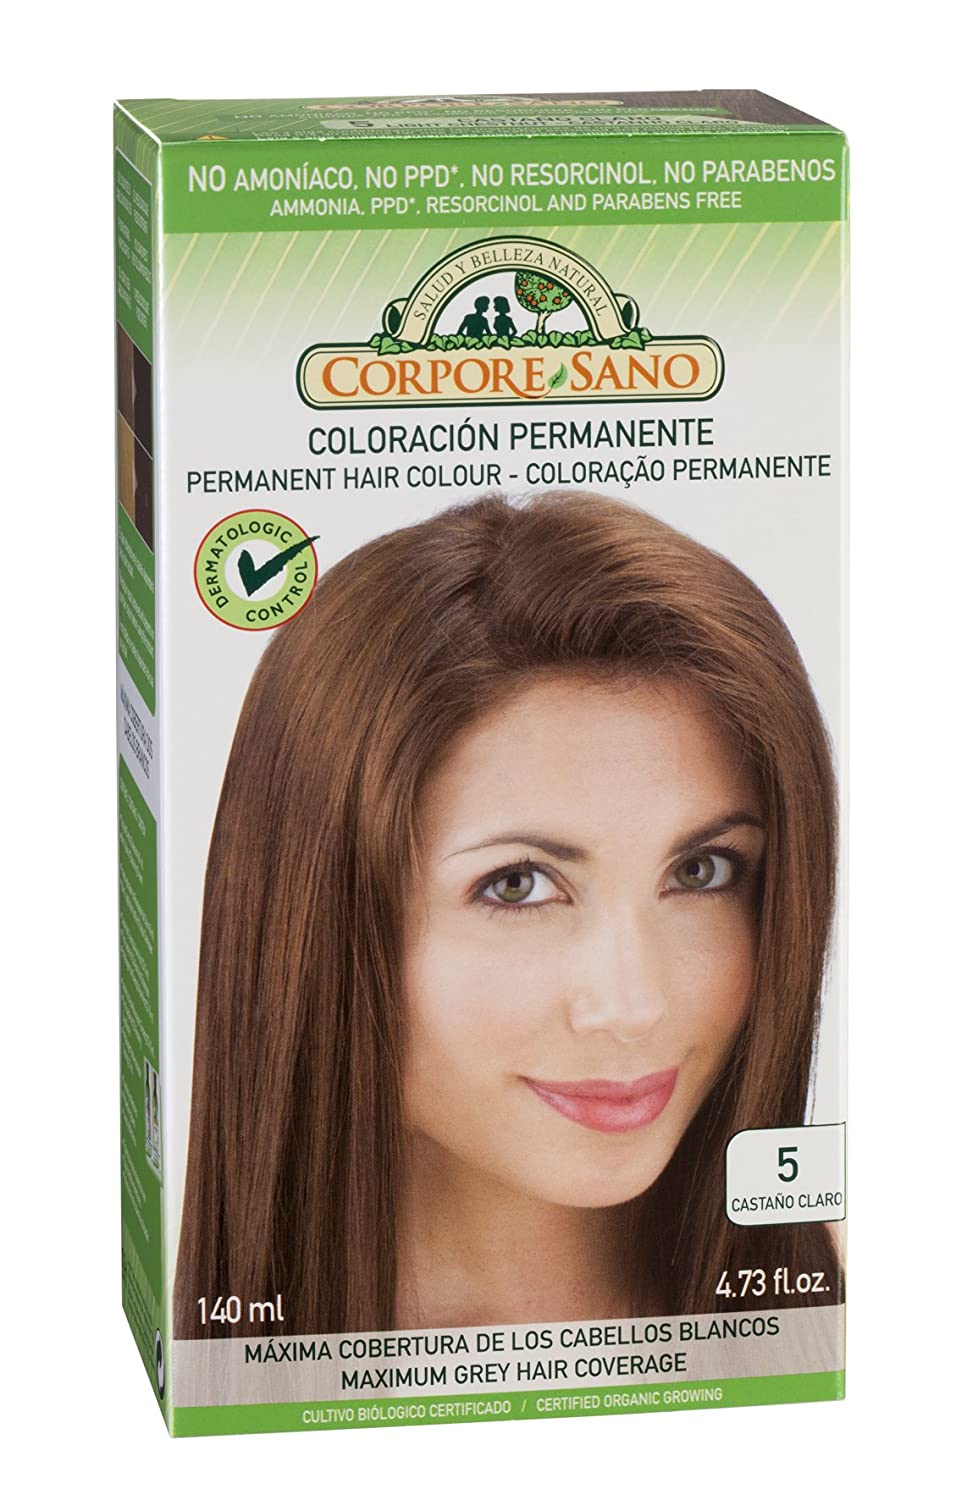 Corpore Sano Permanent Hair Color (Does Not Contain: PPD. AMMONIA, RES ...